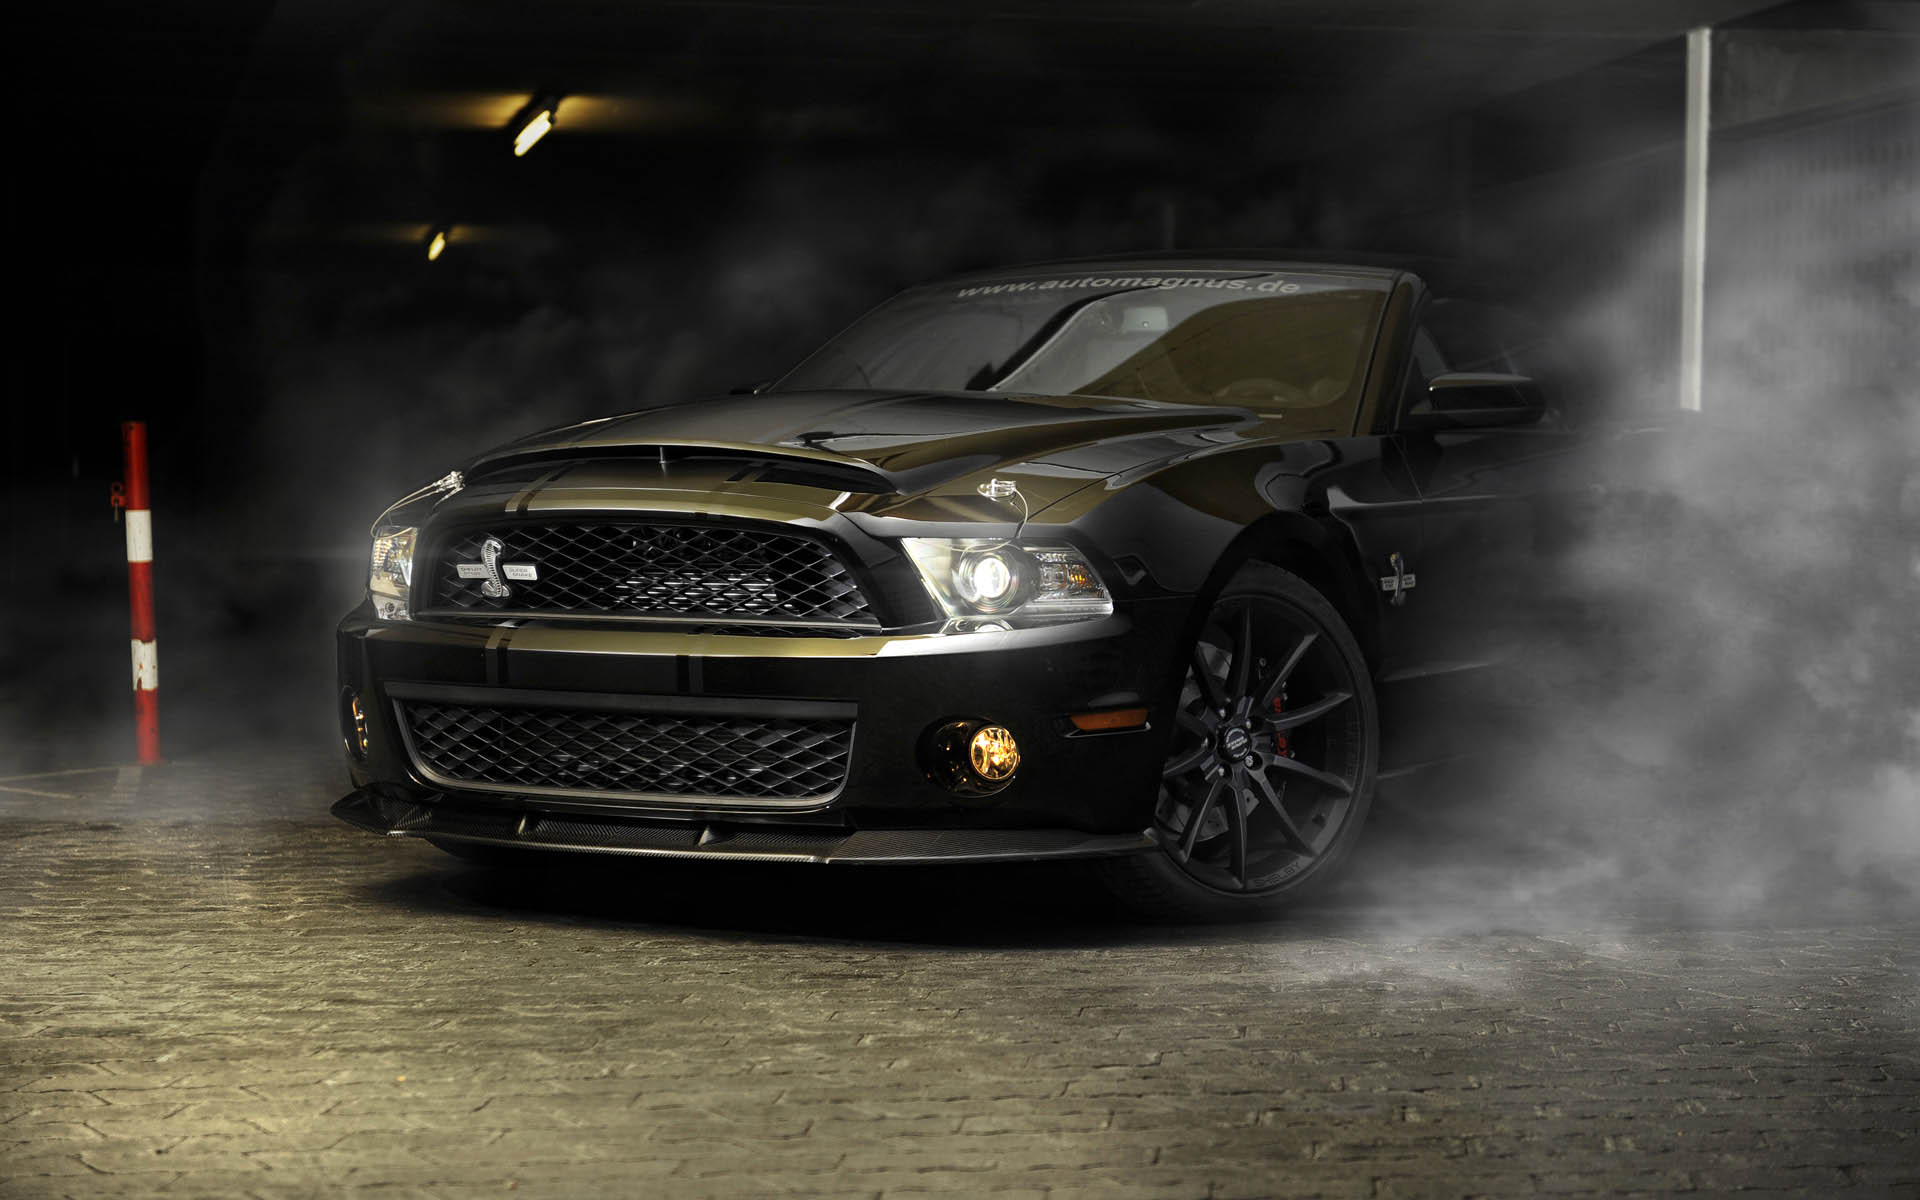 Ford Mustang Shelby Cobra Gt500 Super Snake In The Smoke